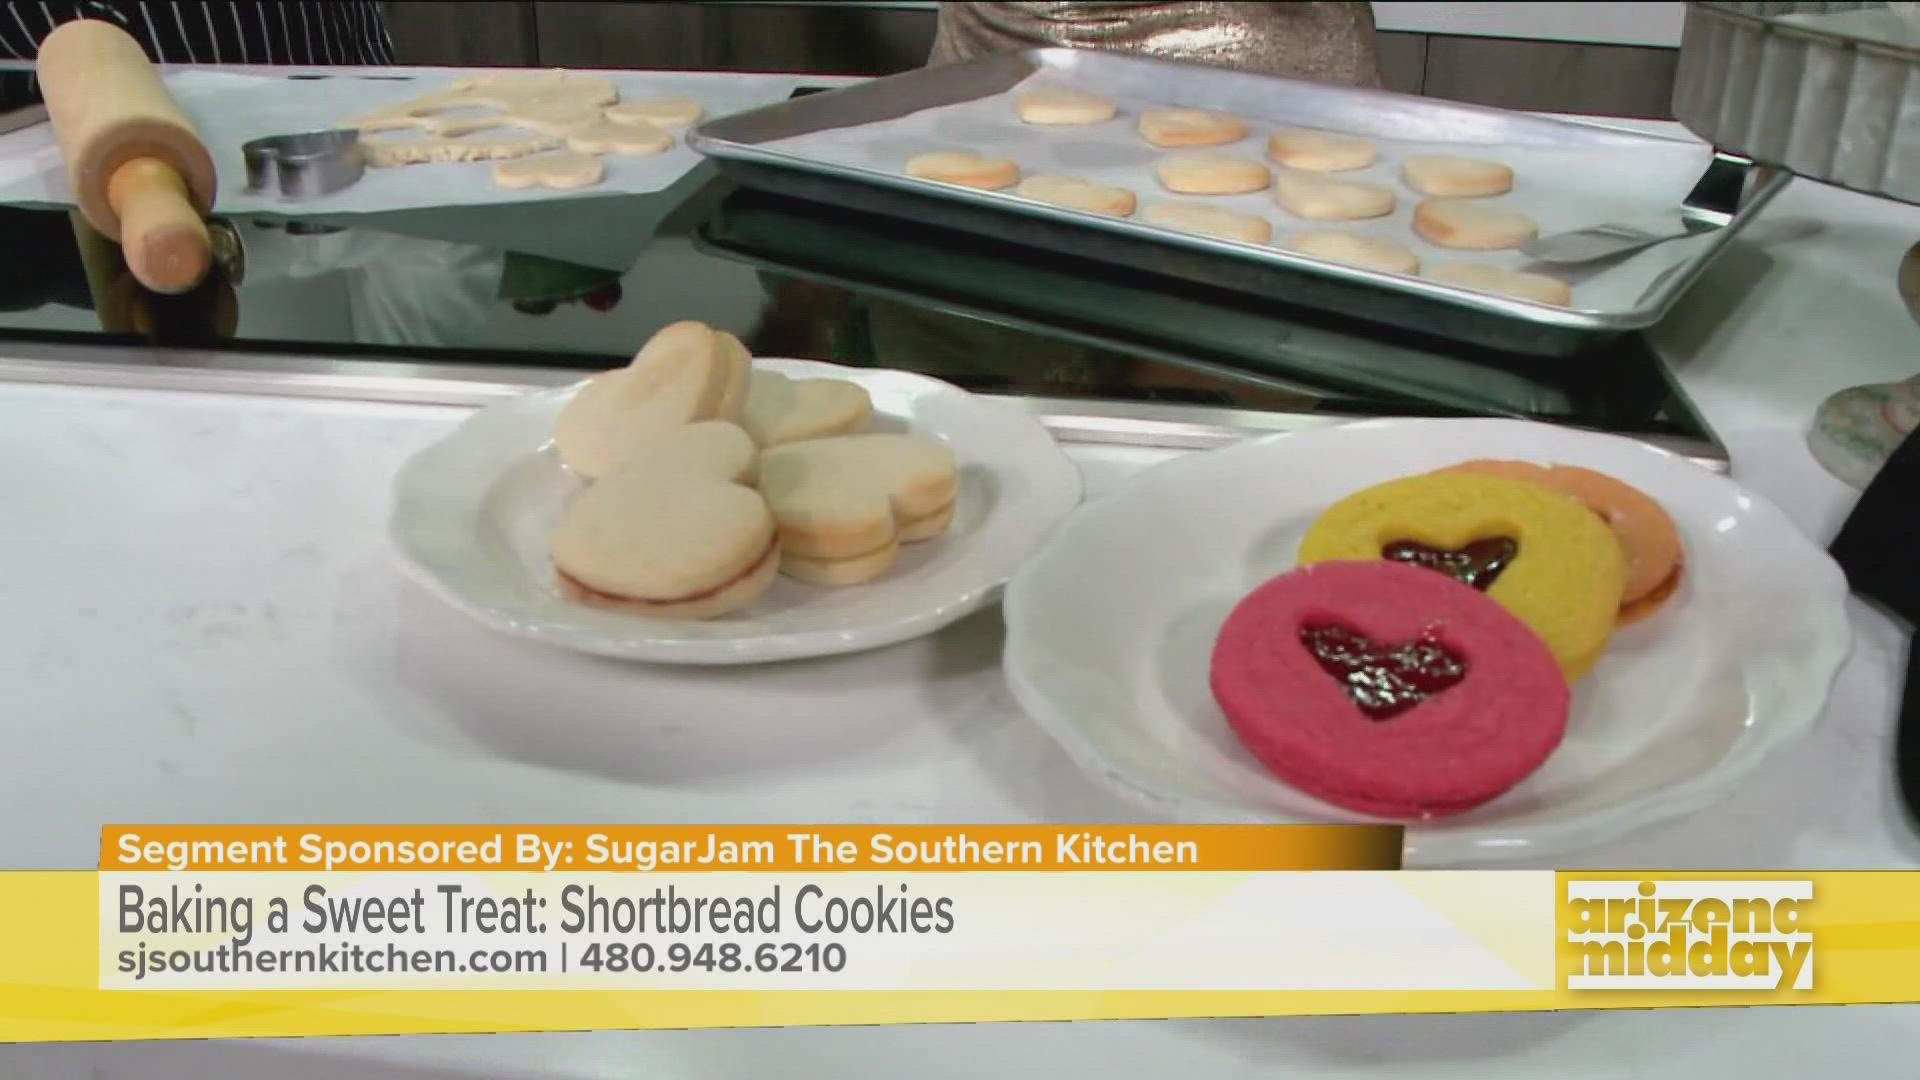 Owner of the SugarJam The Southern Kitchen Dana Dumas shares her story of how she got started and demonstrates how easy it is to bake these delicious treats.